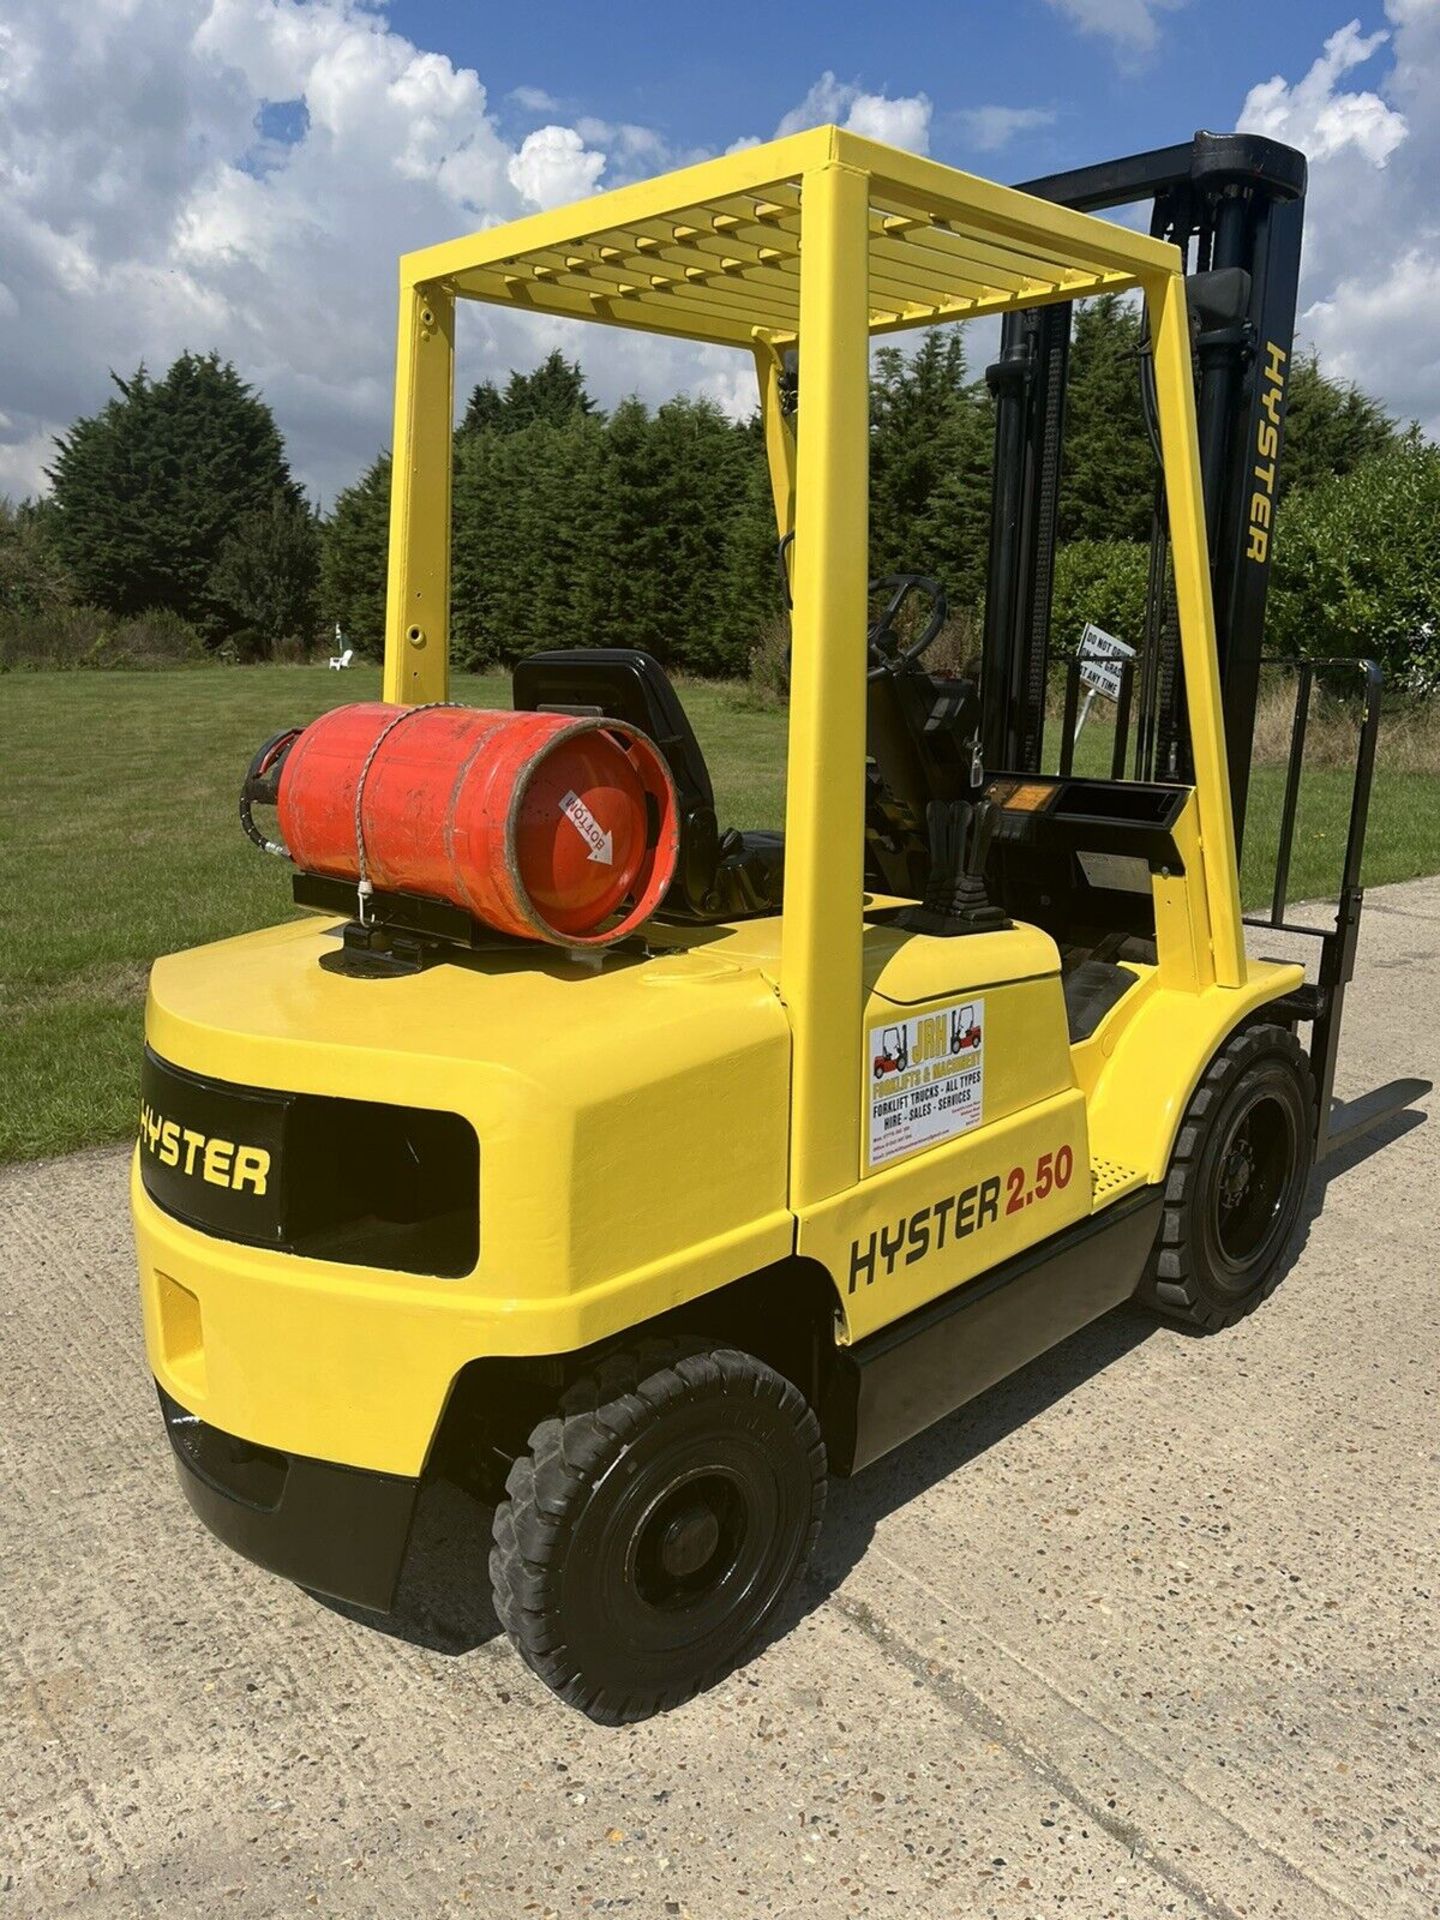 Hyster forklift truck - Image 5 of 5